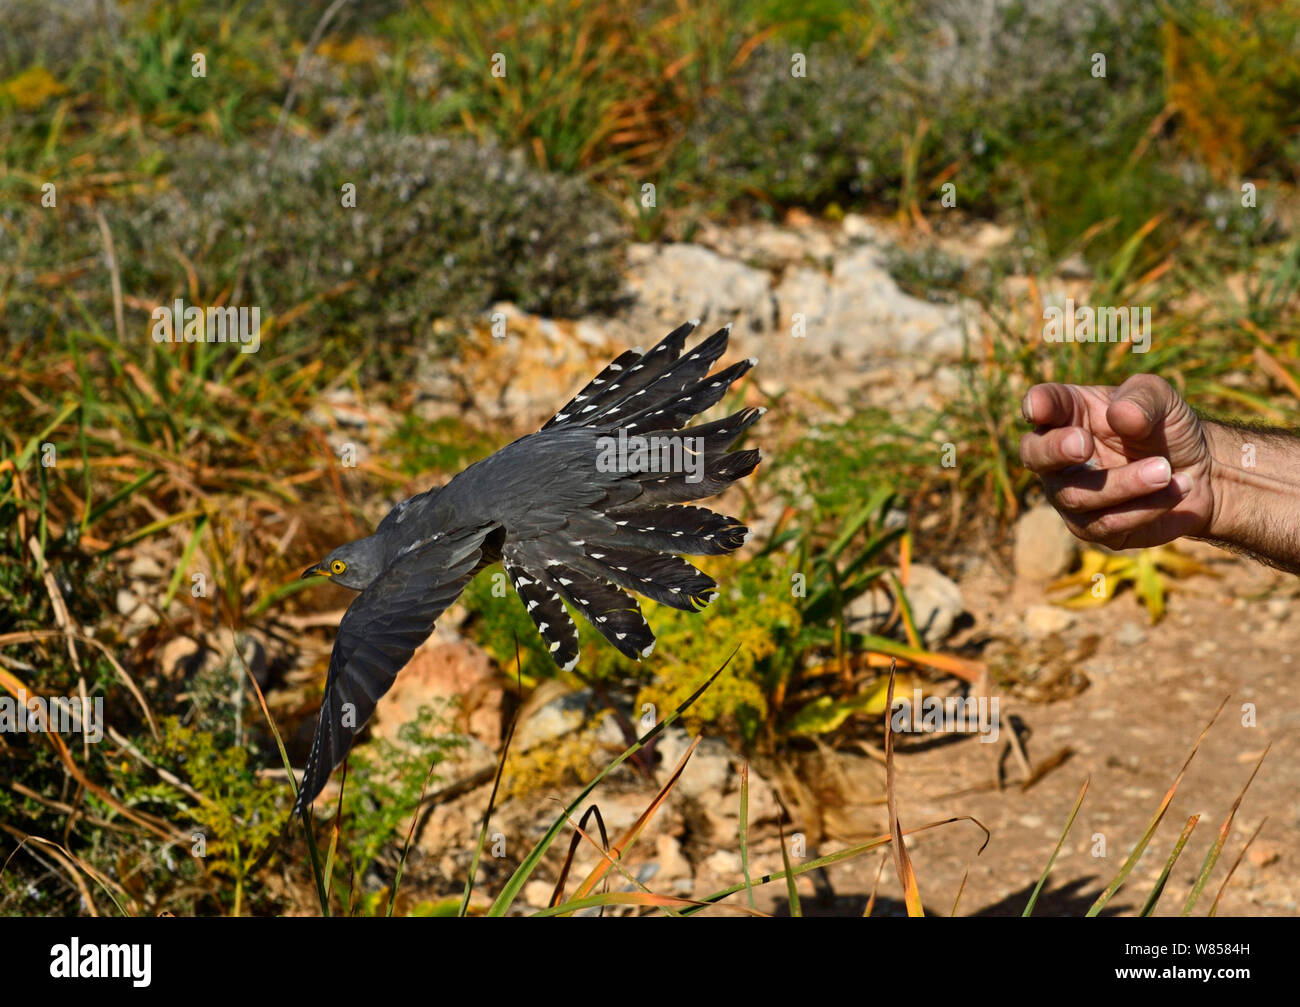 Cuckoo (Cuculus canorus) male had been shot being released back into the wild on Comino, during Birdlife Malta Springwatch Camp, Malta, April 2013 Stock Photo